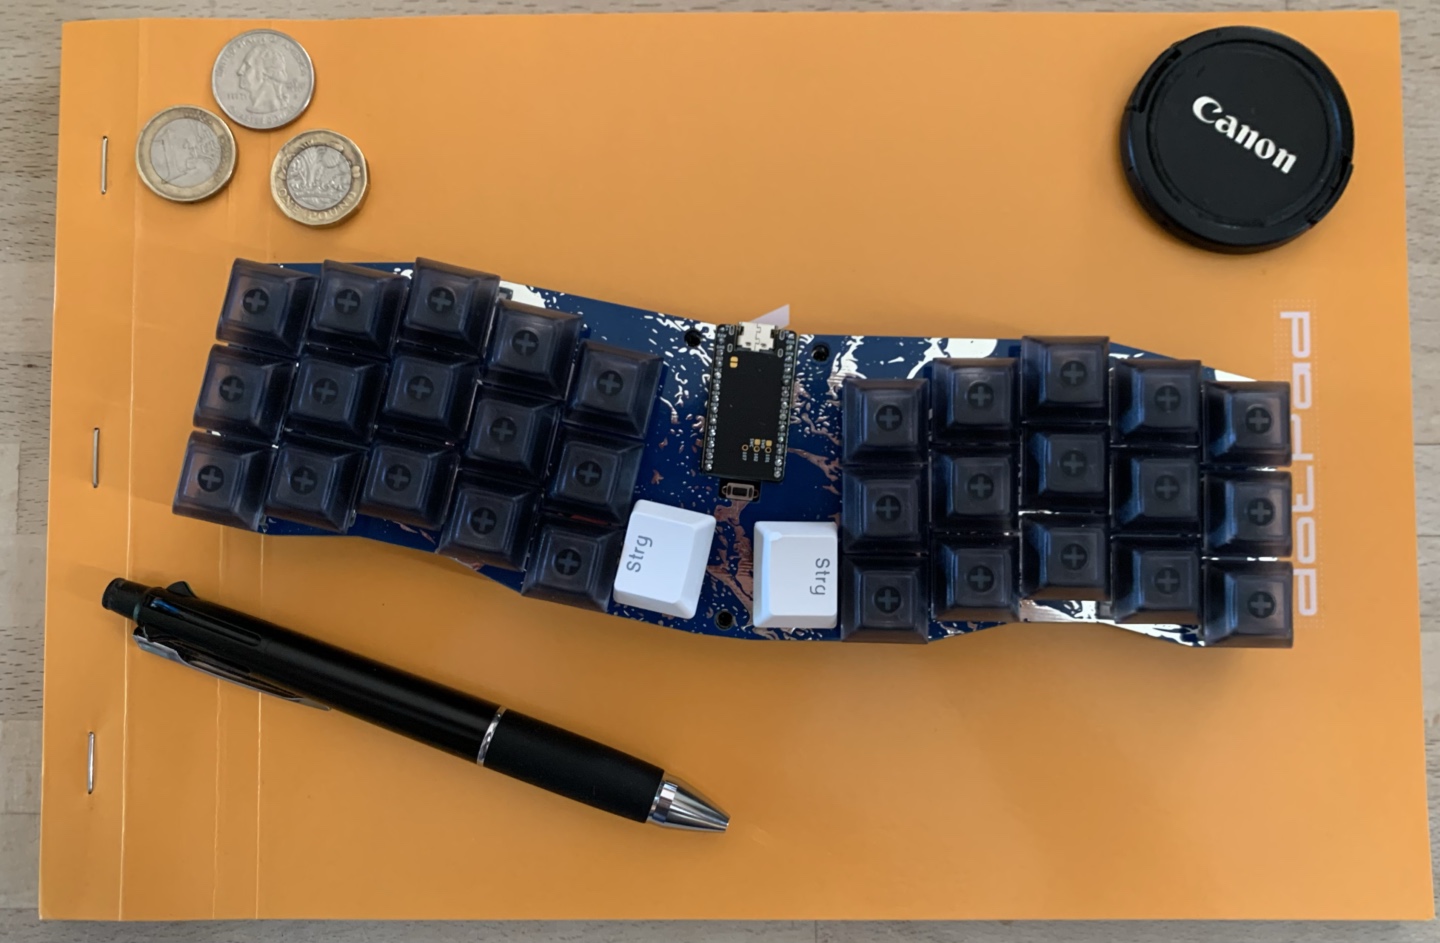 Manta keyboard with various objects for scale